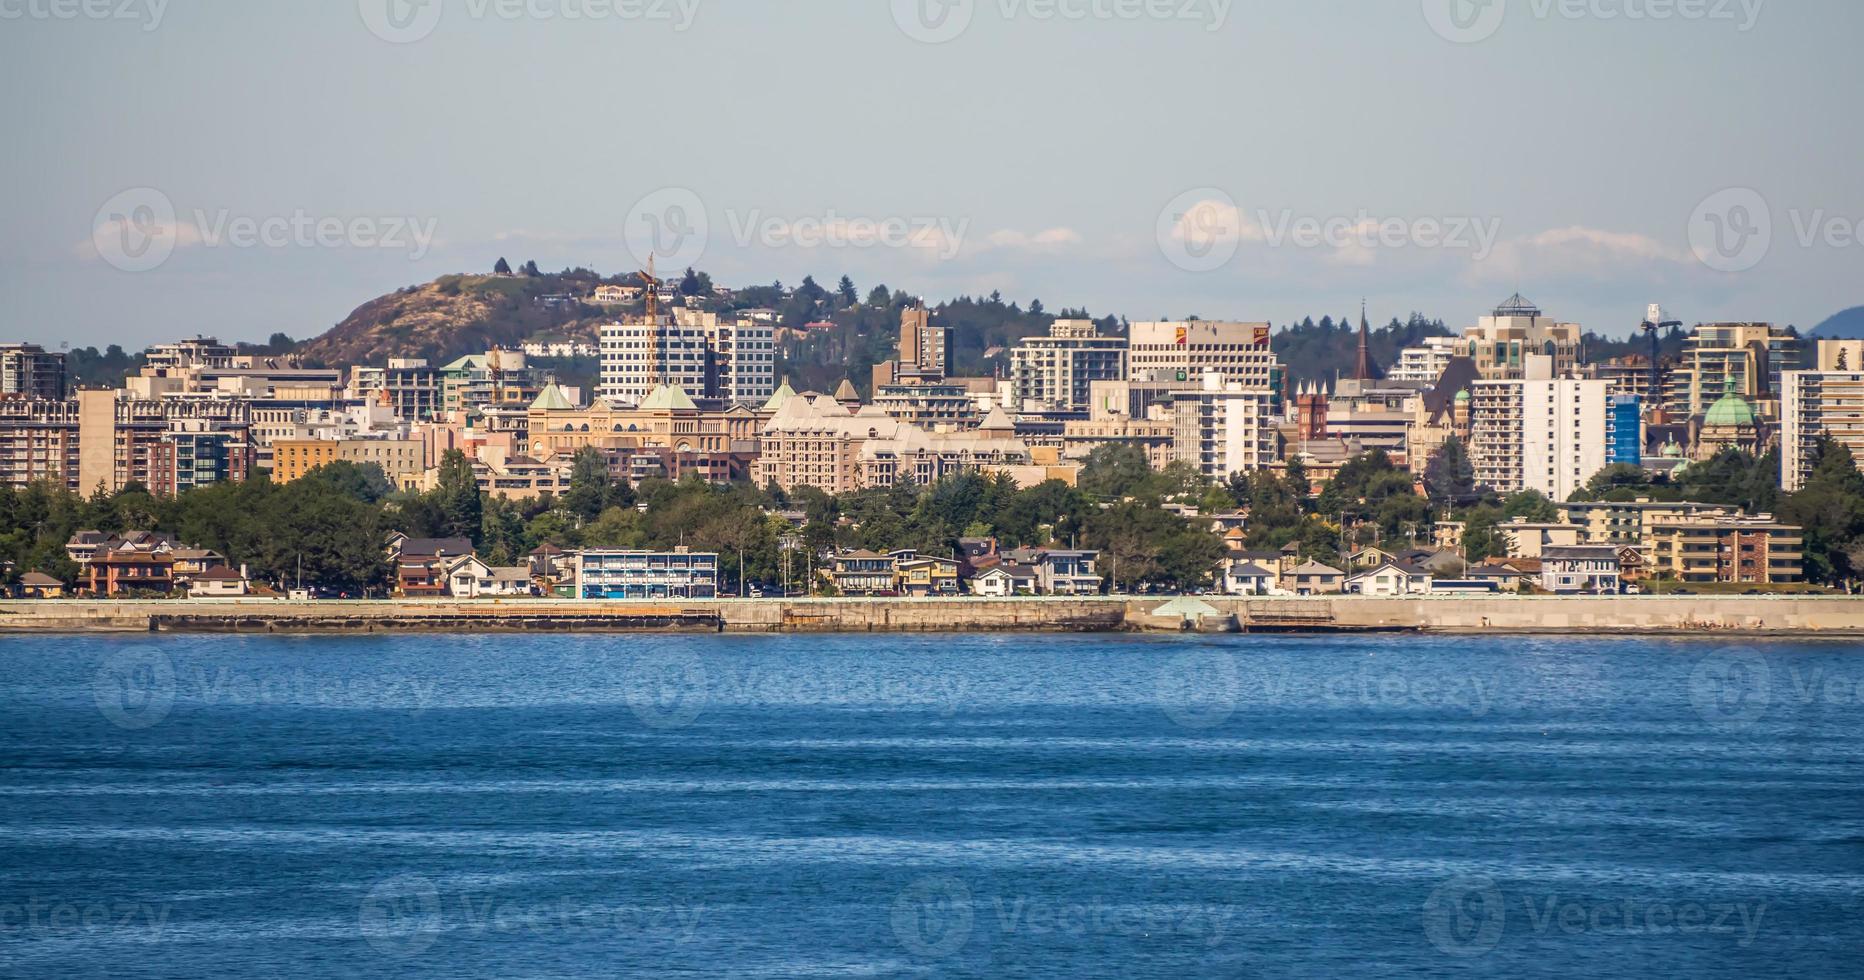 views from Ogden Point cruise ship terminal in Victoria BC.Canada photo